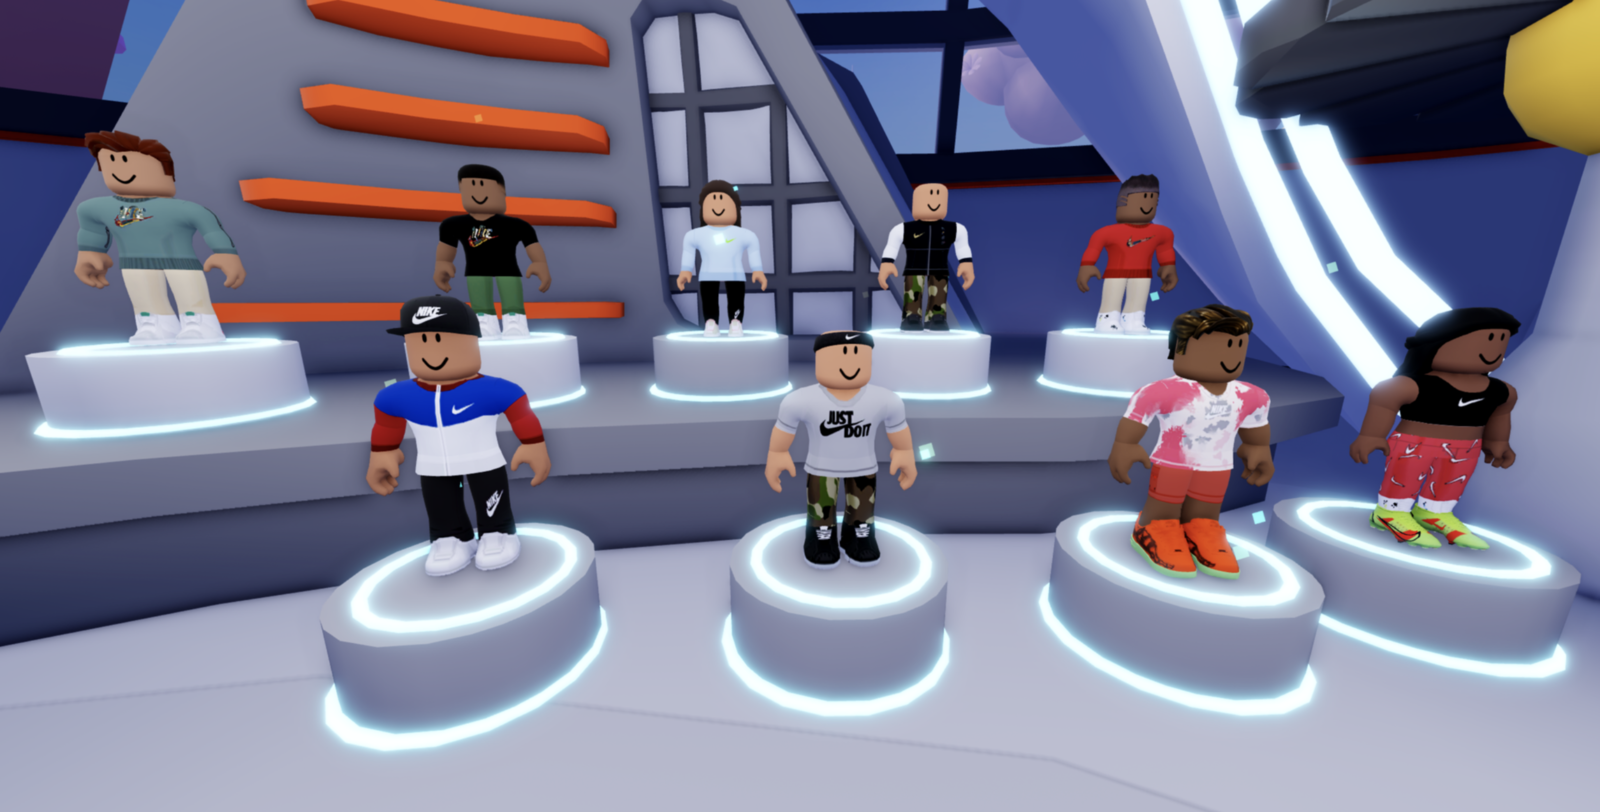 Roblox on LinkedIn: Roblox invests another $15 million to promote  educational games